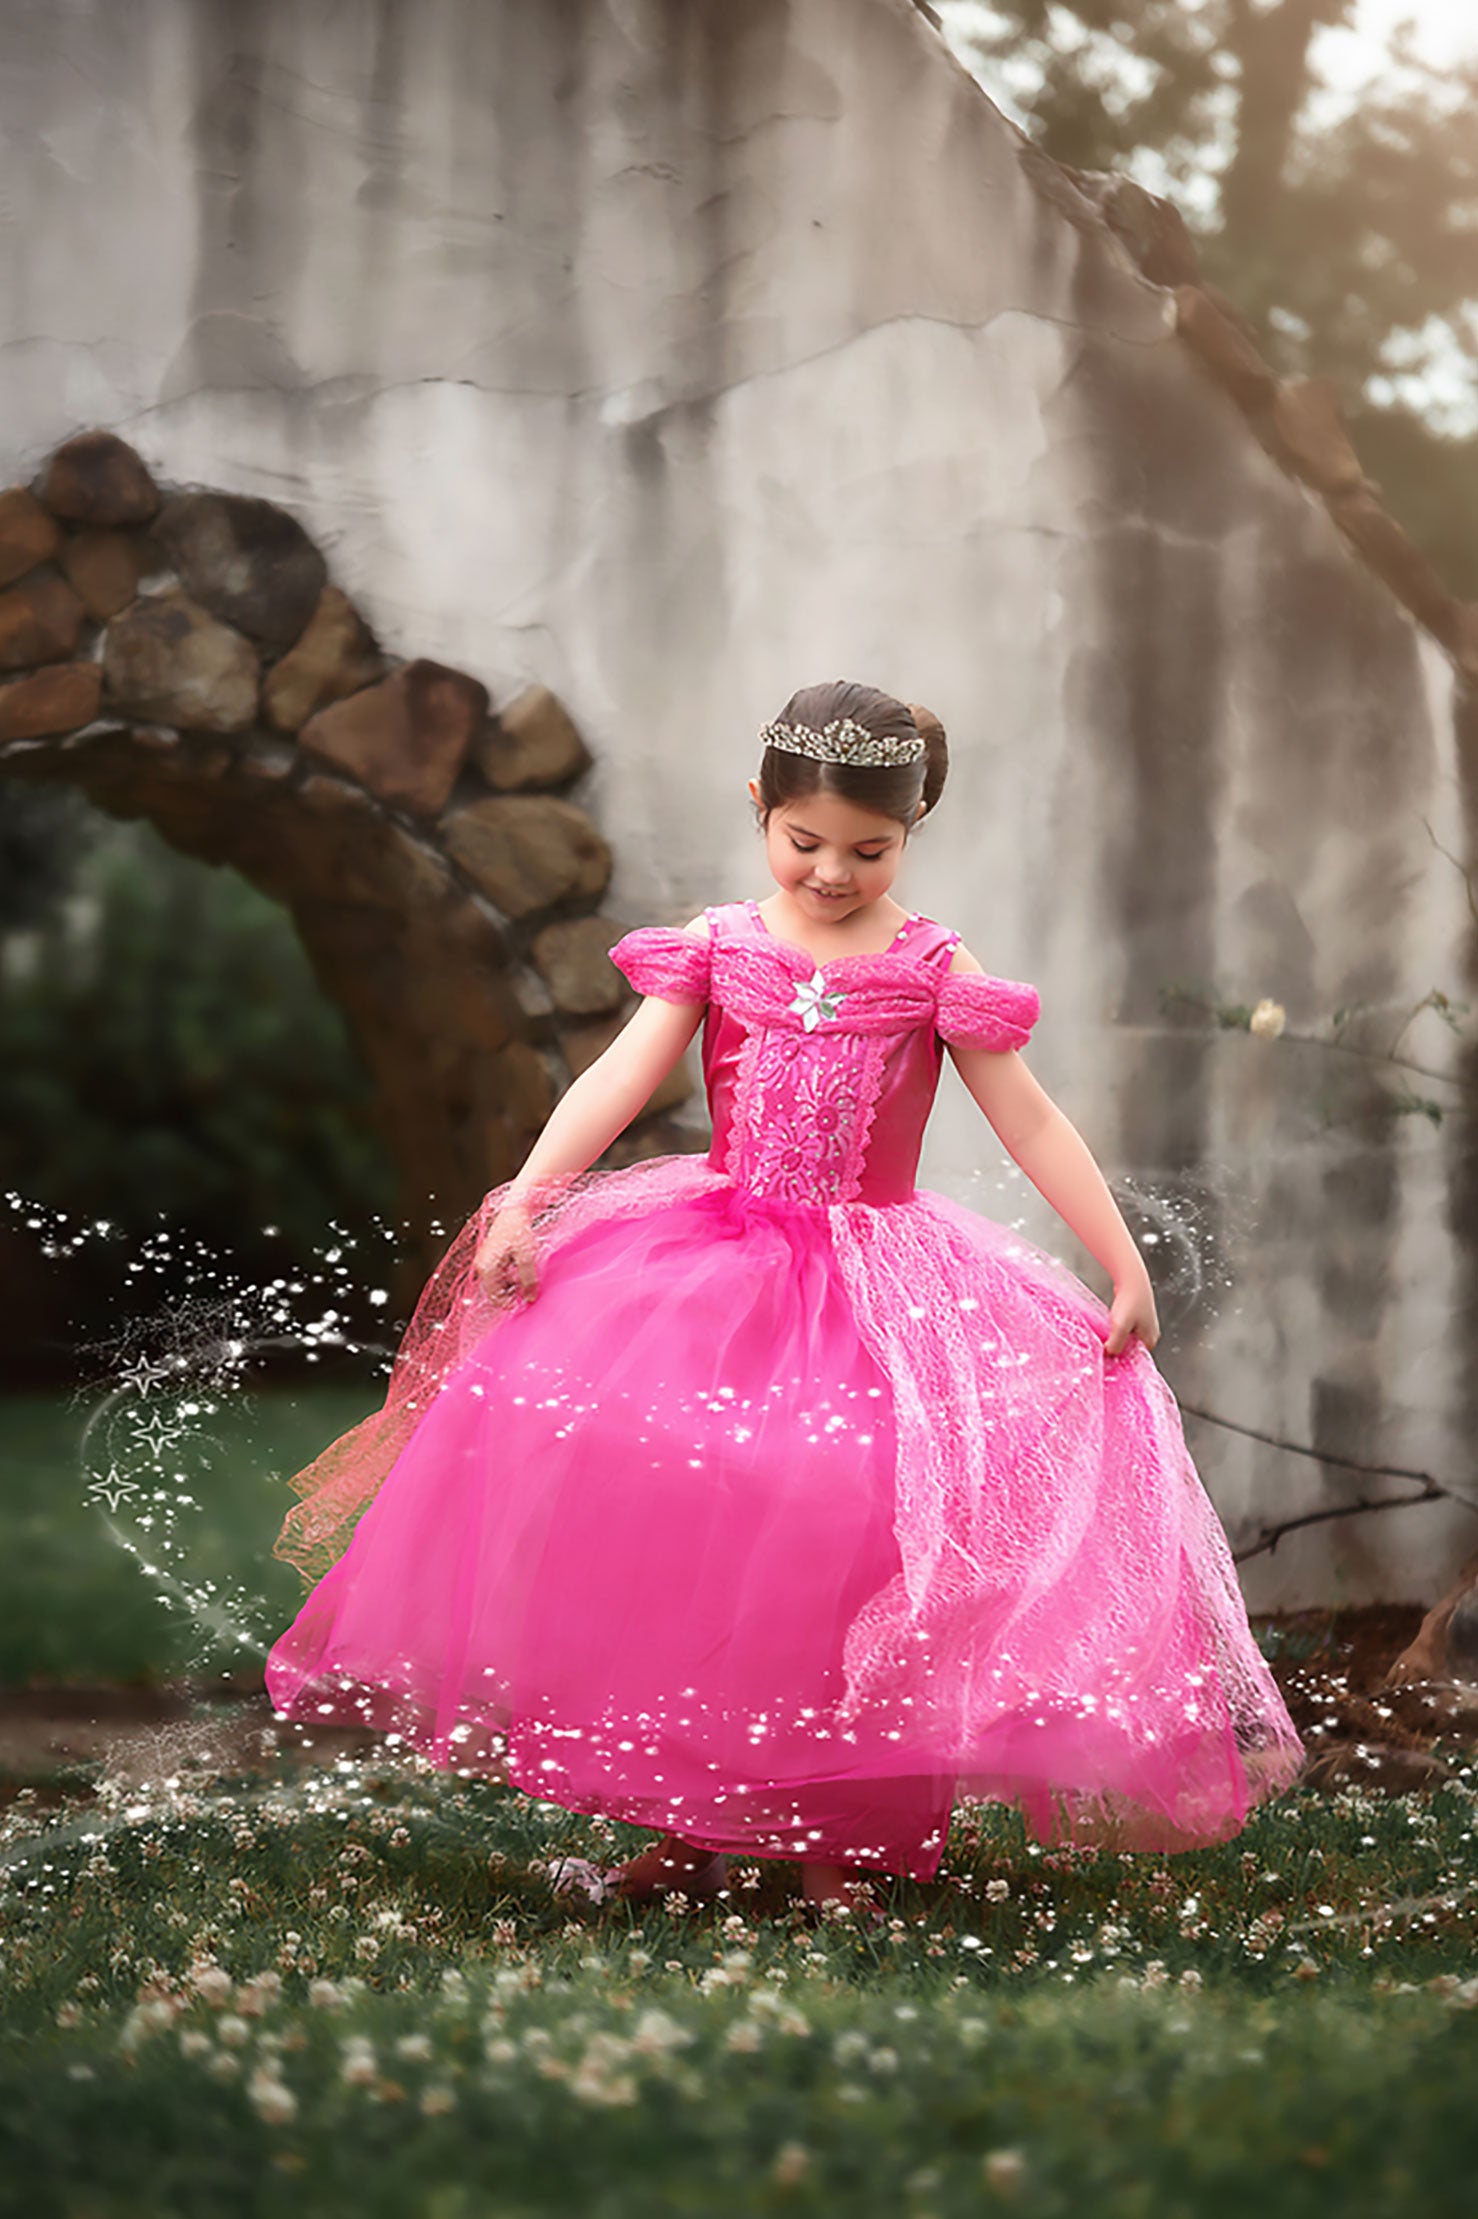 Pink Princess Dress Costume For Toddler Girls – TRISH SCULLY